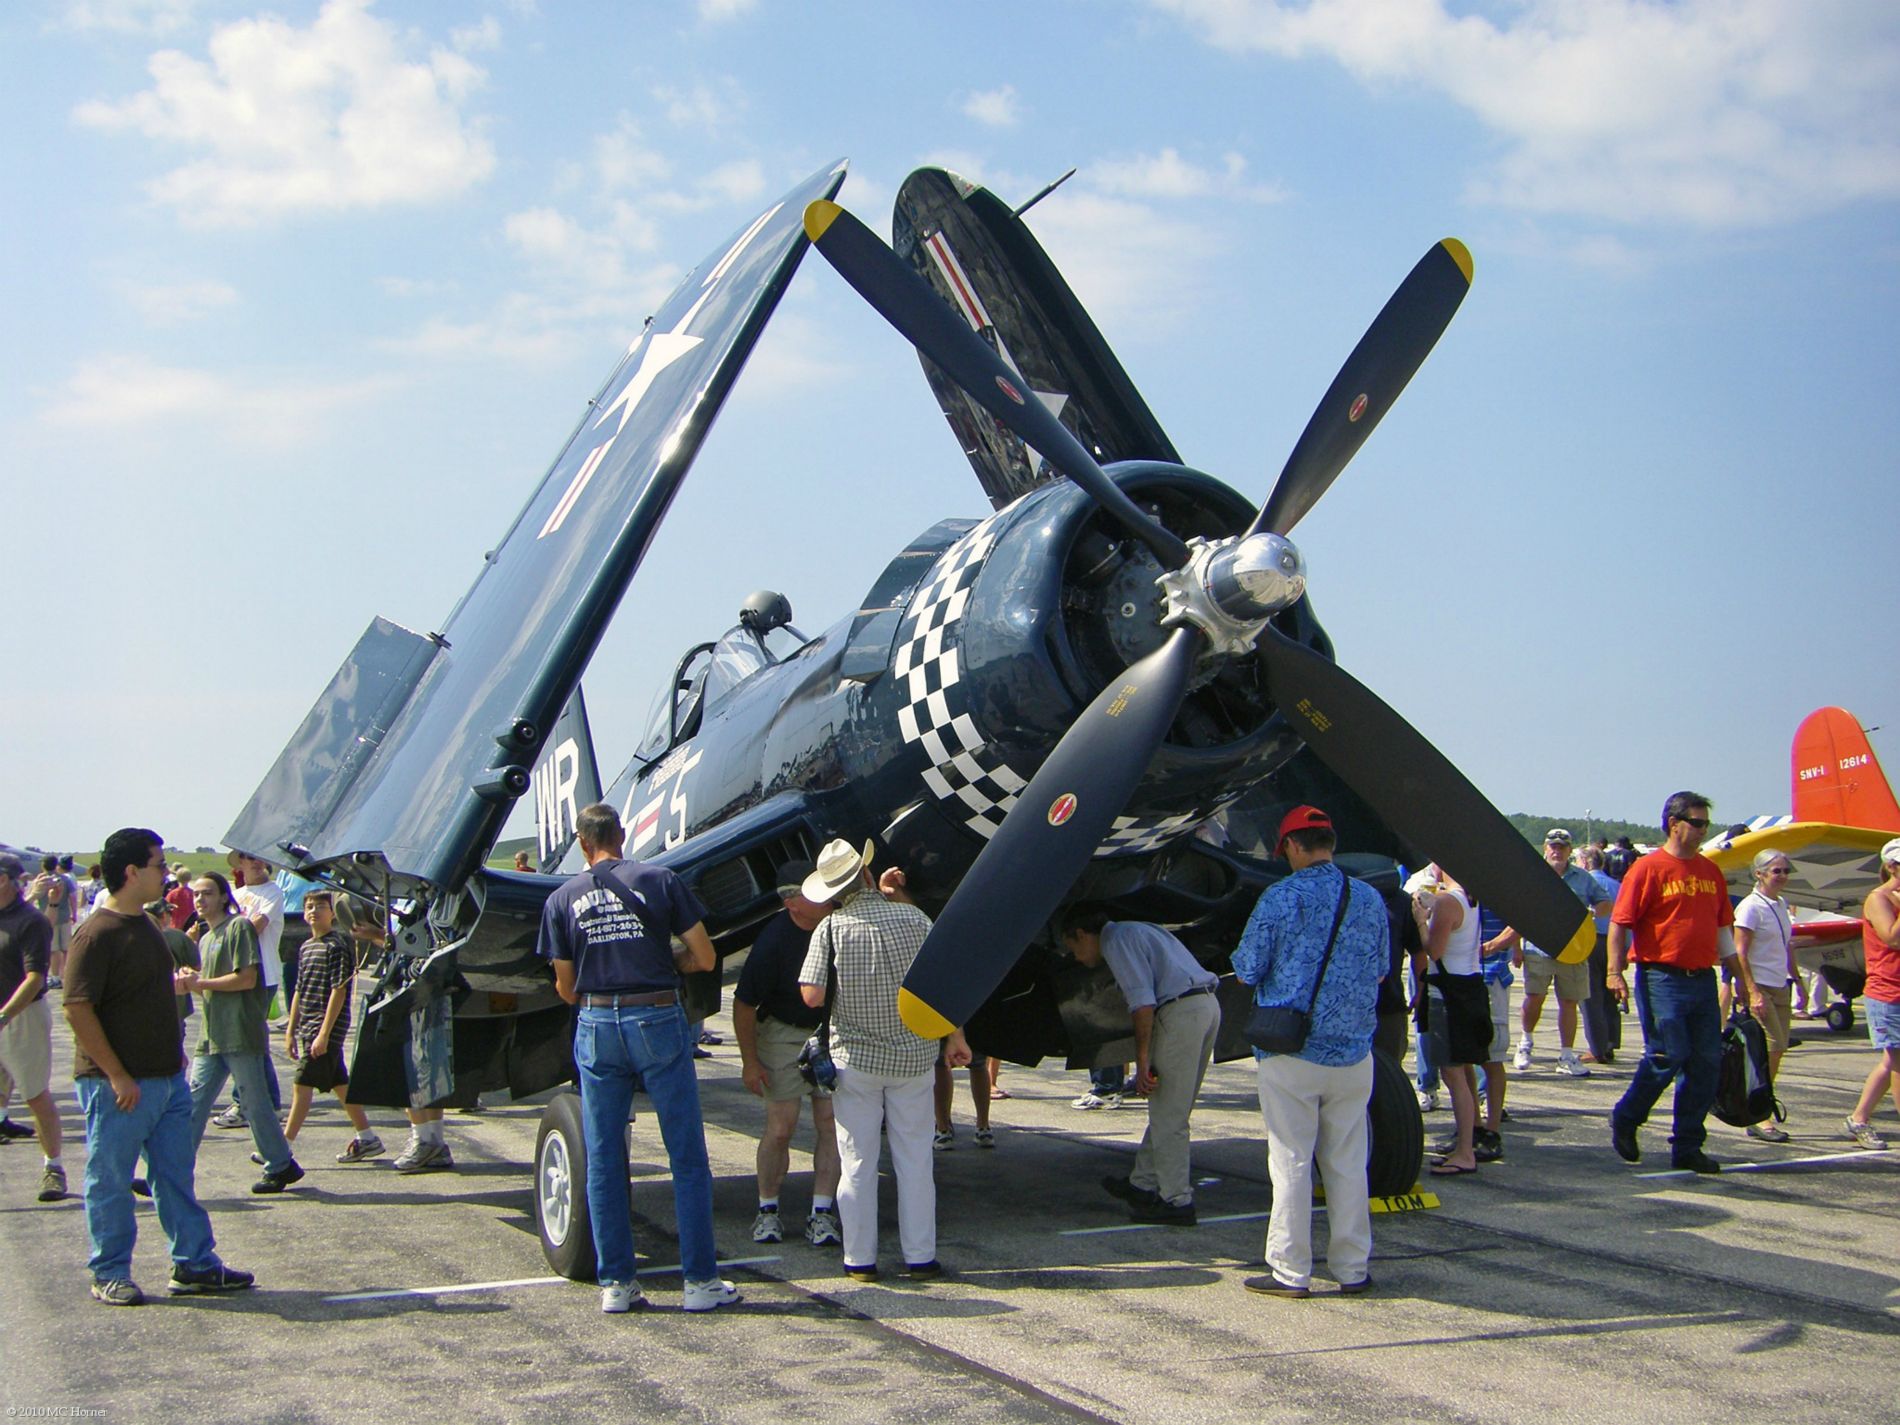 Back on the ground, a Voight Corsair gets close scrutiny.